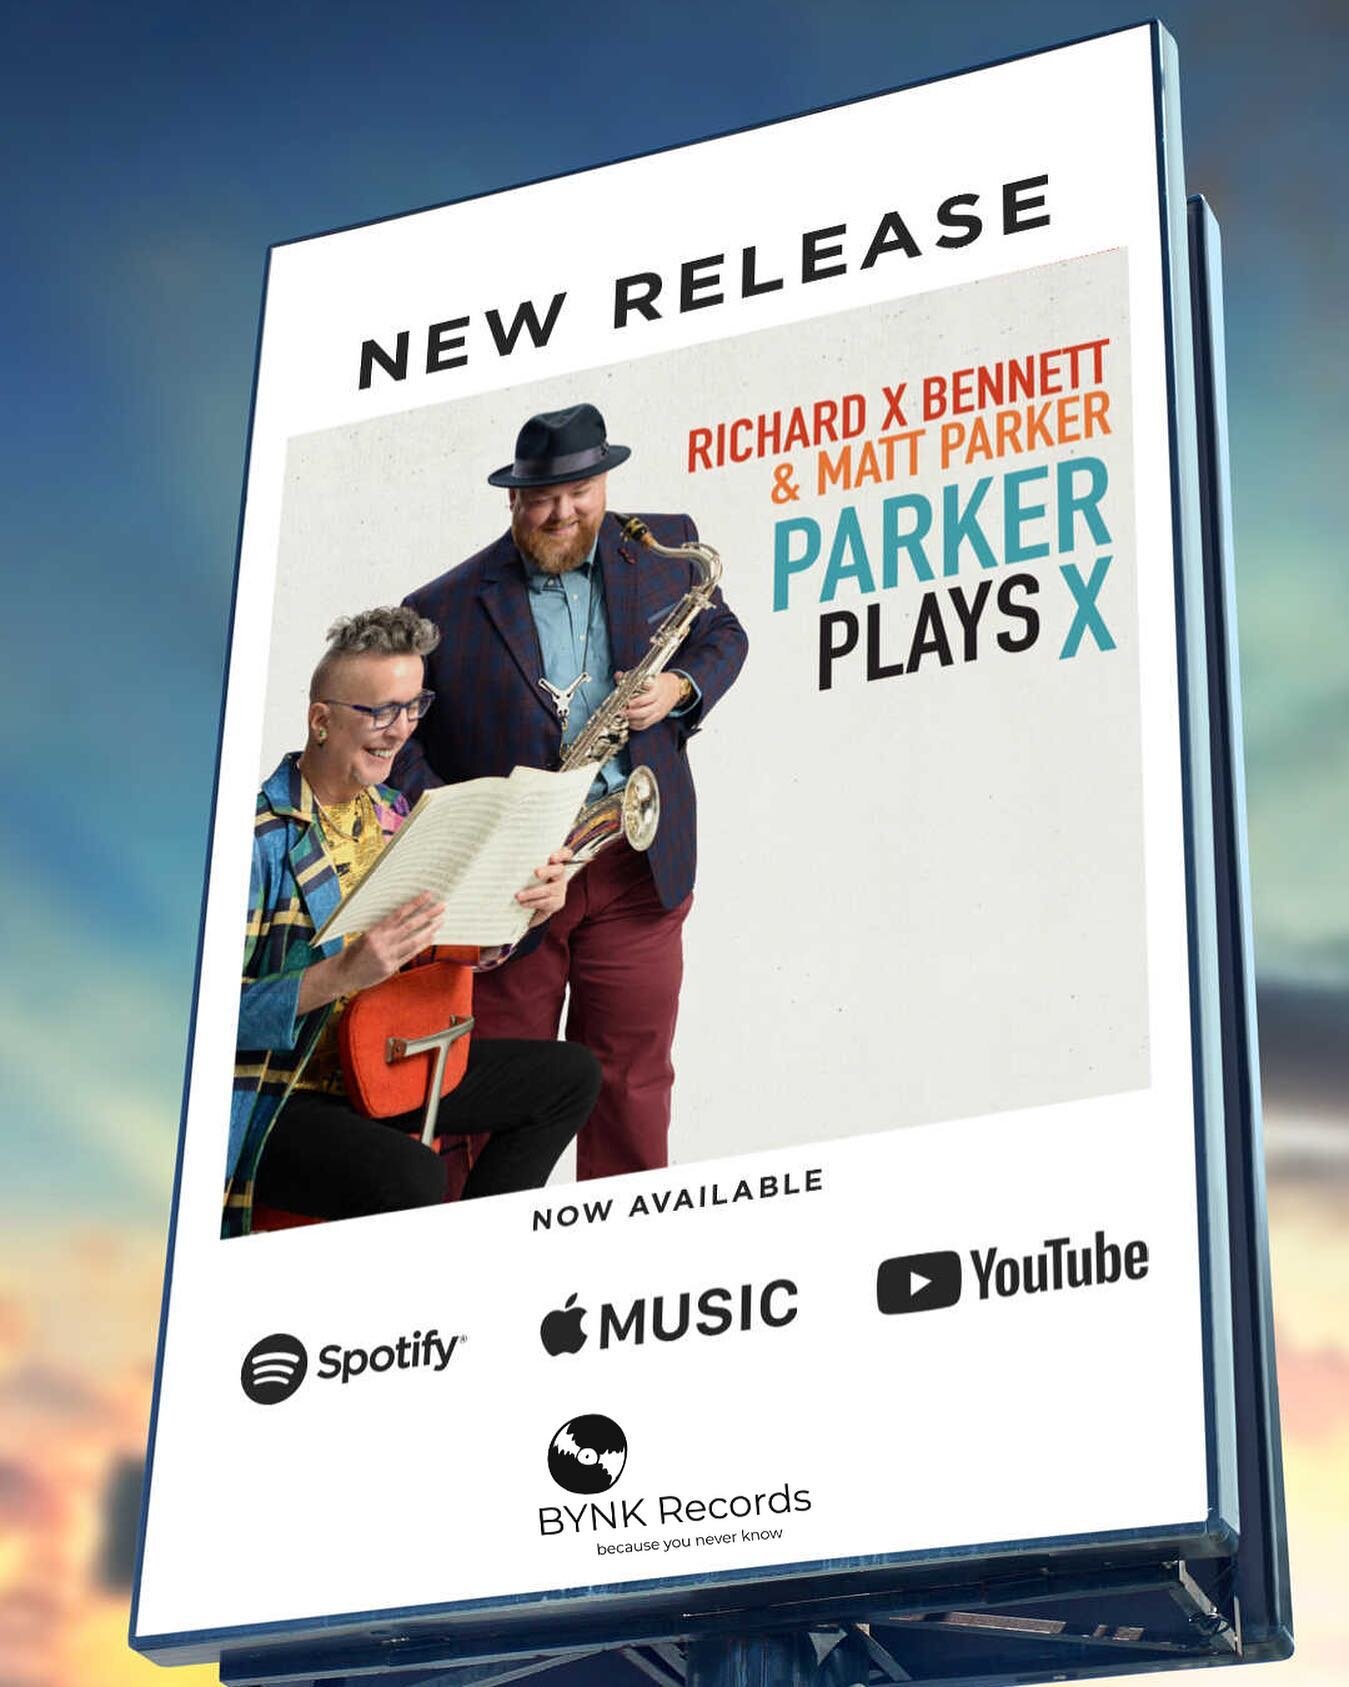 Parker Plays X is streaming on all platforms. It&rsquo;s also a beautiful day to pick up your physical CD of the album now at www.bynkrecords.com. Thank you for such a great release weekend!

@richardxbennett @mattparkermusic 
#parkerplaysx #newmusic